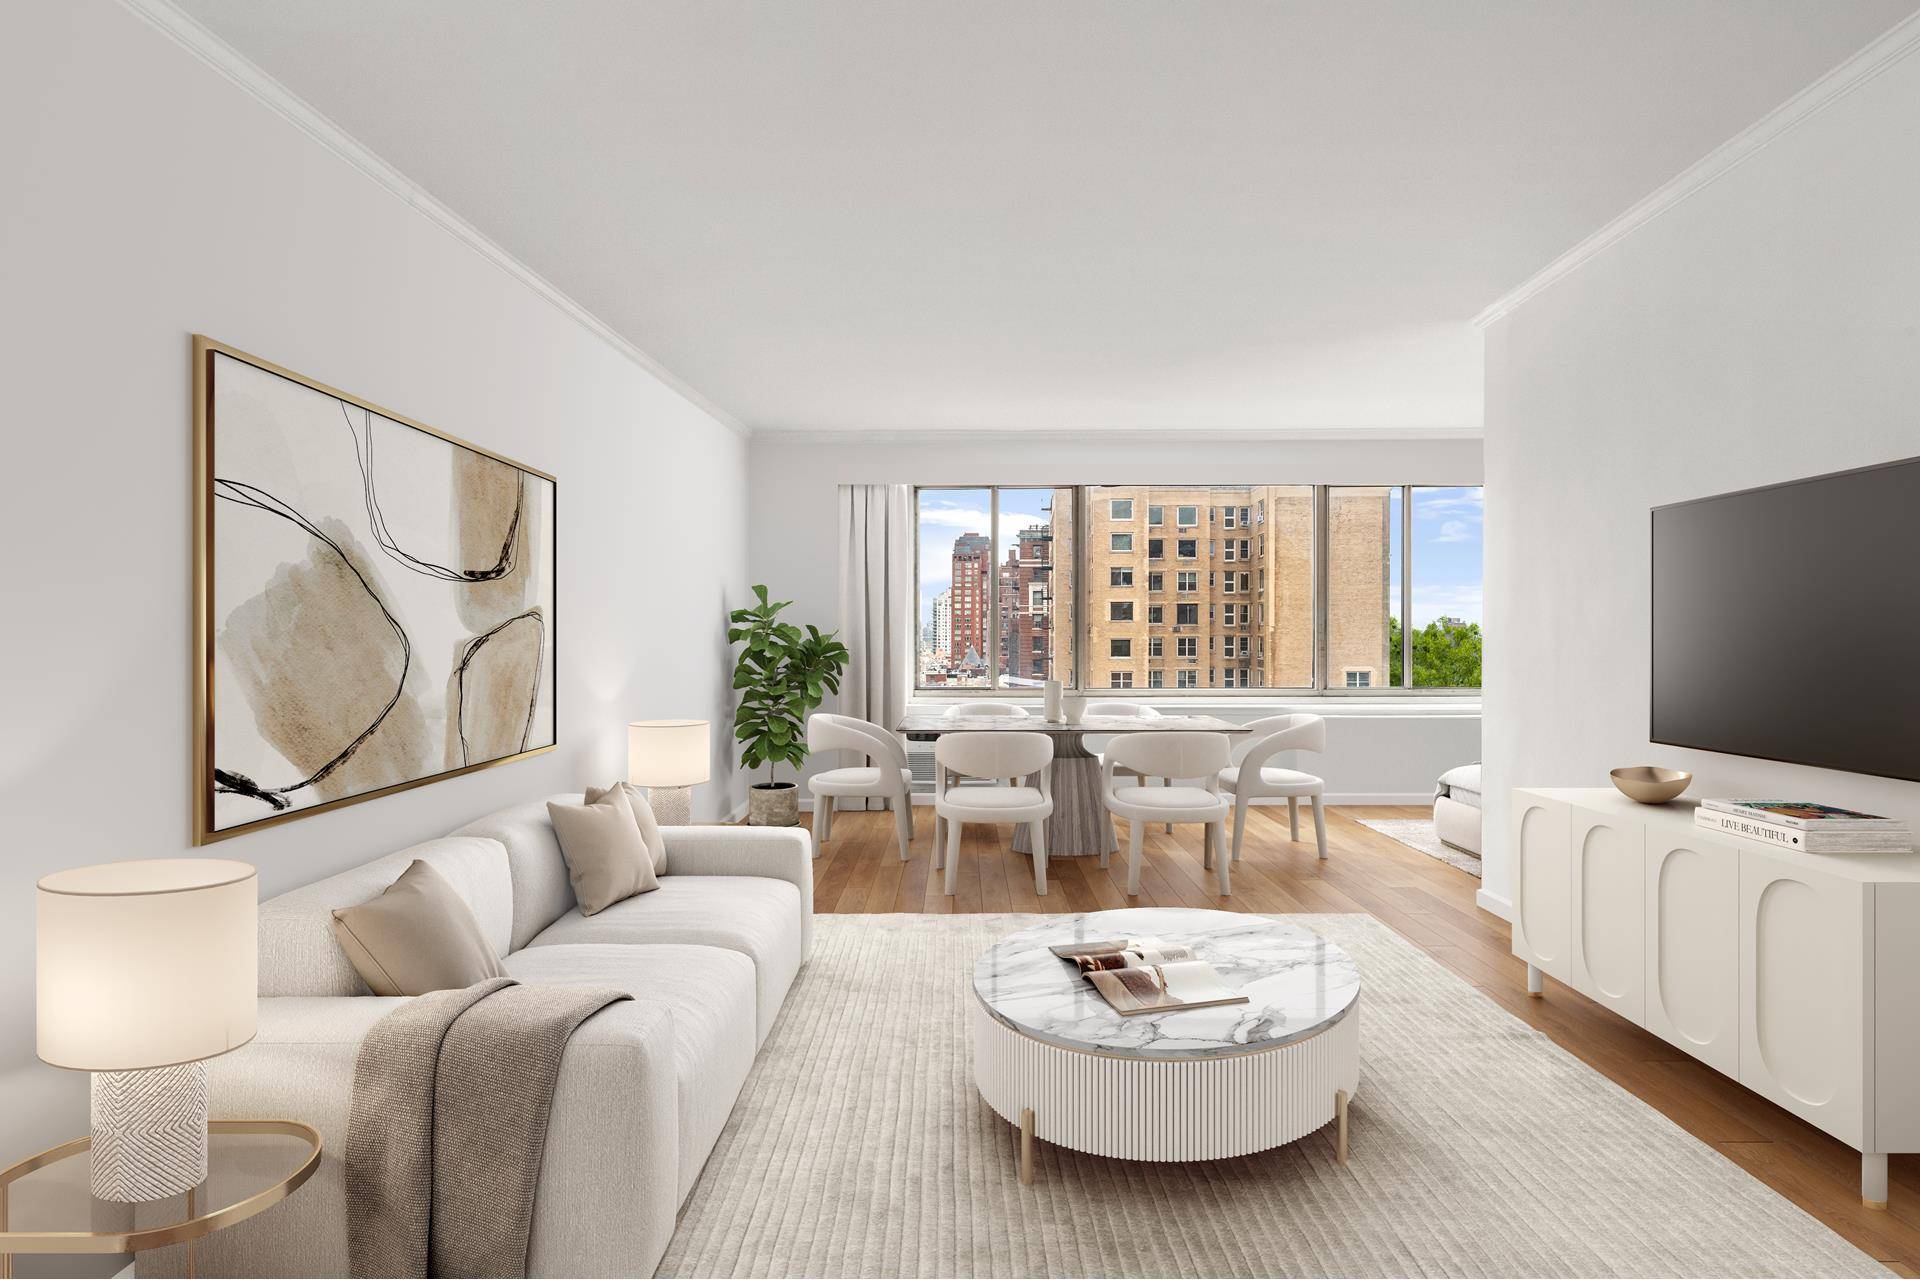 High Floor, Central Park ViewsNewly renovated studio apartment greeted by views of Central Park.